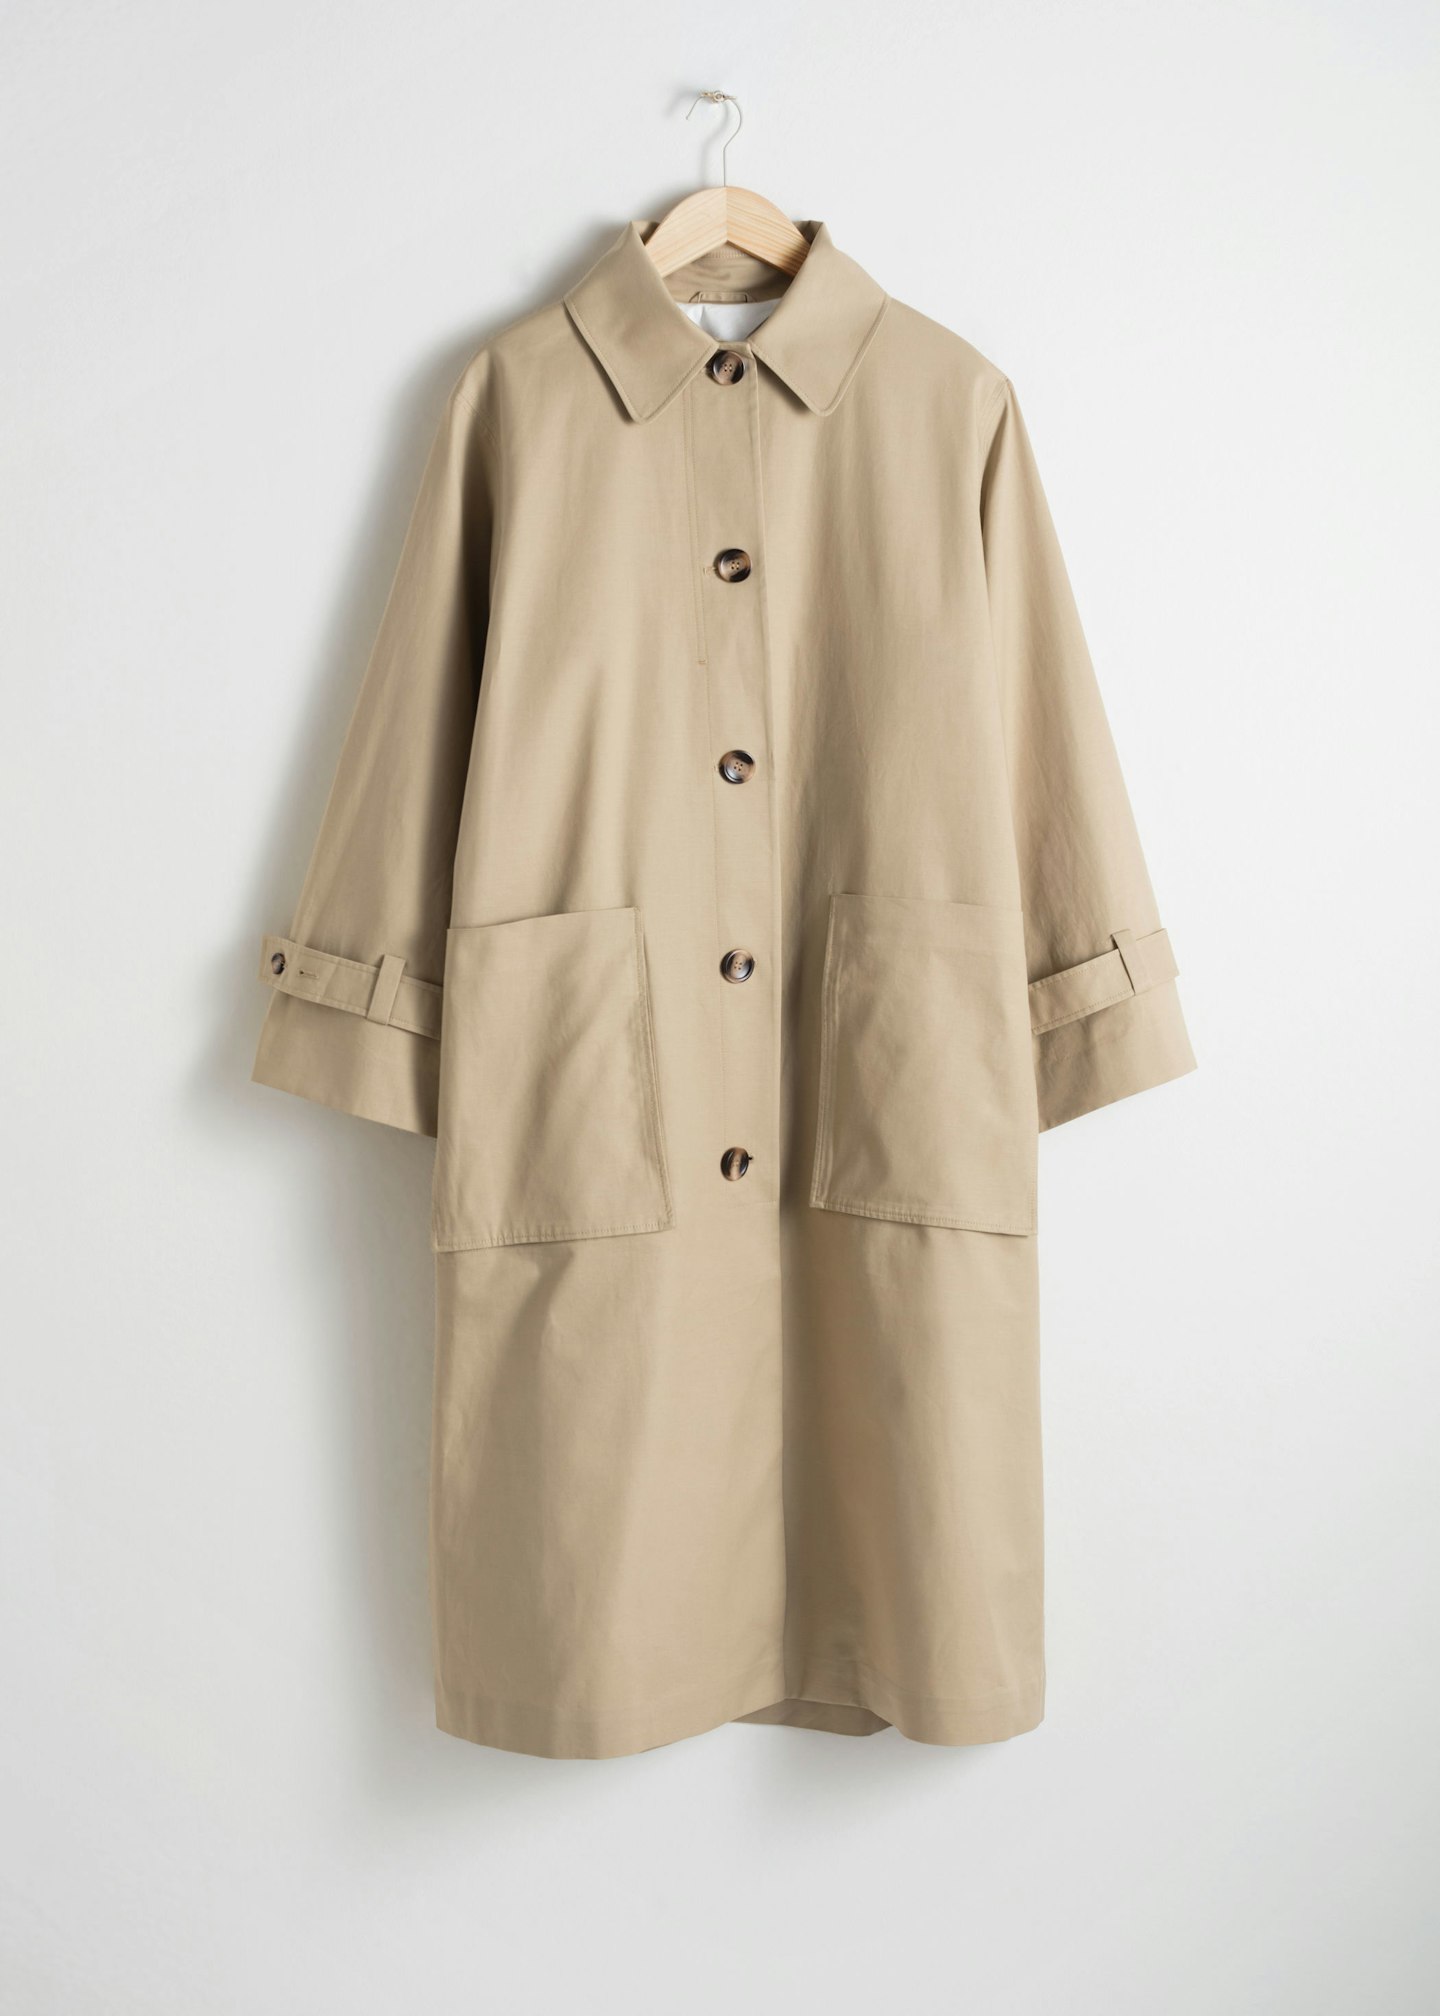 Other Stories, Oversized Utilitarian Trenchcoat